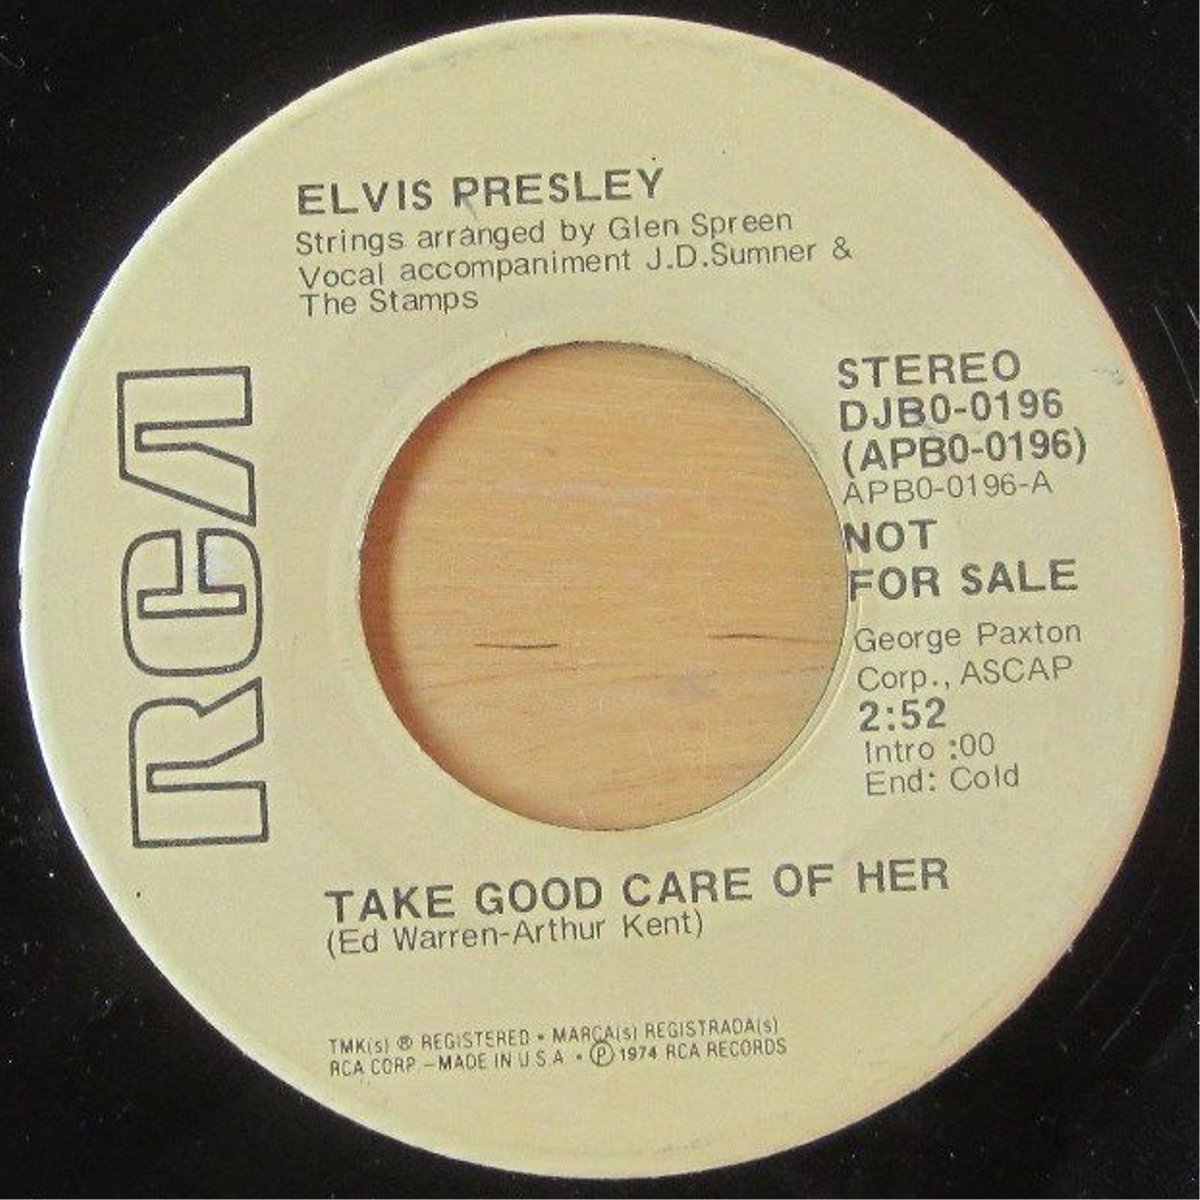 I've Got A Thing About You Baby / Take Good Care Of Her Djb0-0196d5dlbz